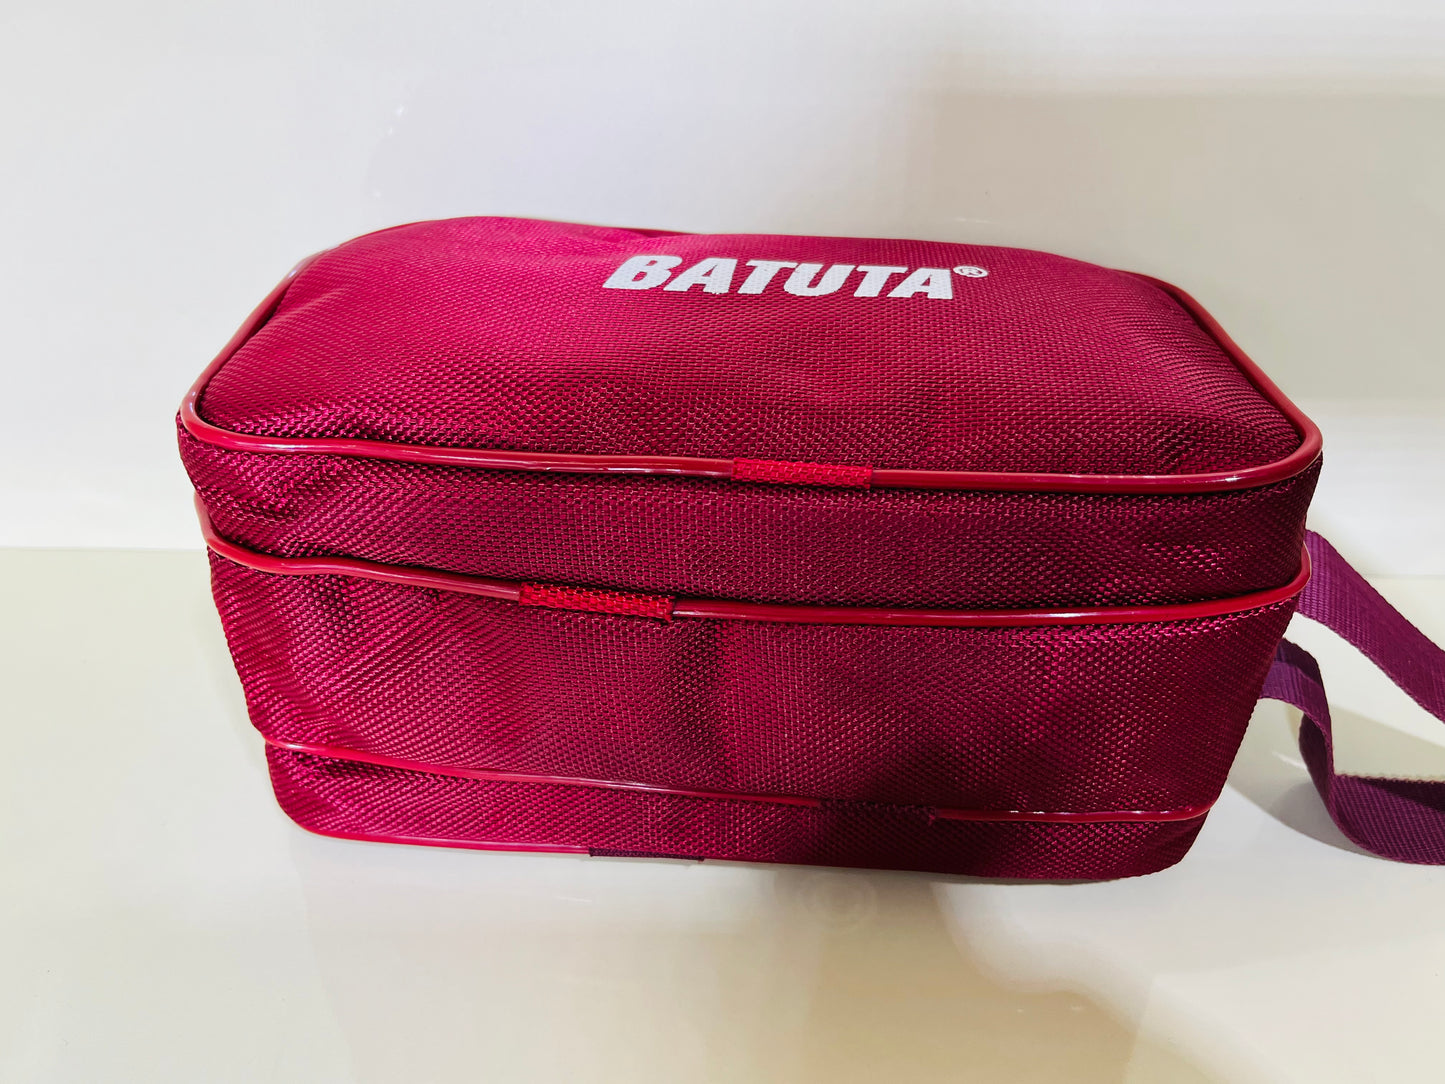 BATUTA HUB -Toiletry Bag for Men and Women Travel Pouch, Shaving Kit Bag for Home & Travel- 23 x 11x 10 cm, Zip Closer 2Main Compartment Ideal to Organize